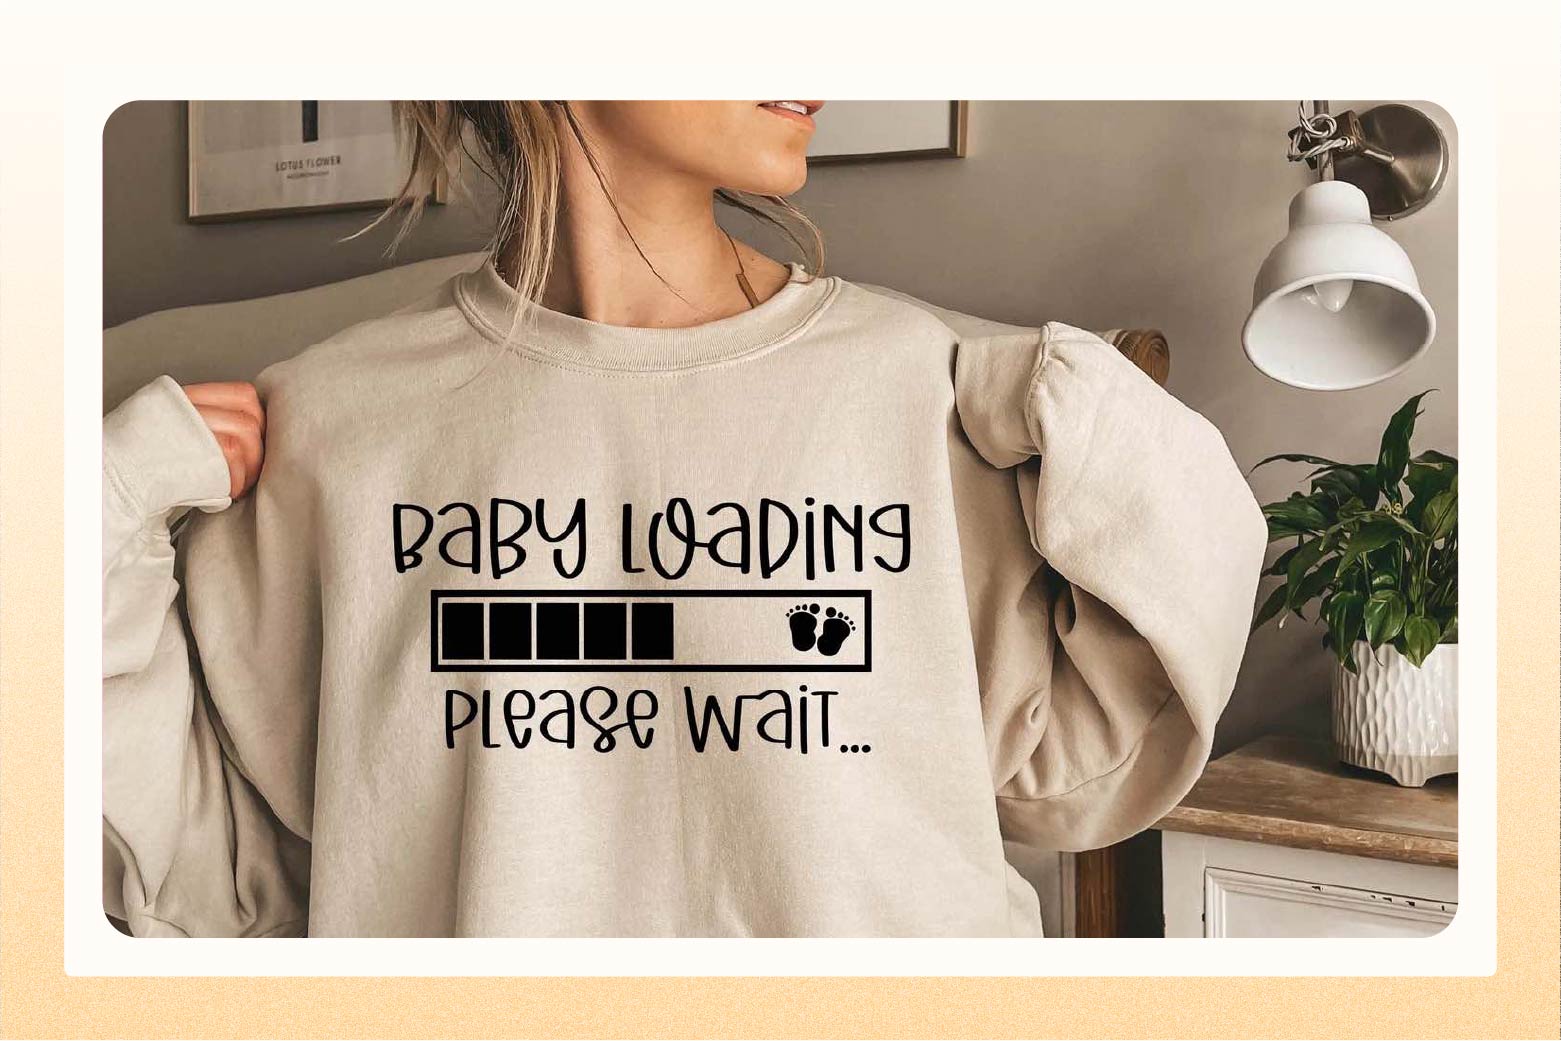 Close up of woman wearing a beige sweatshirt that says "Baby loading, please wait"  